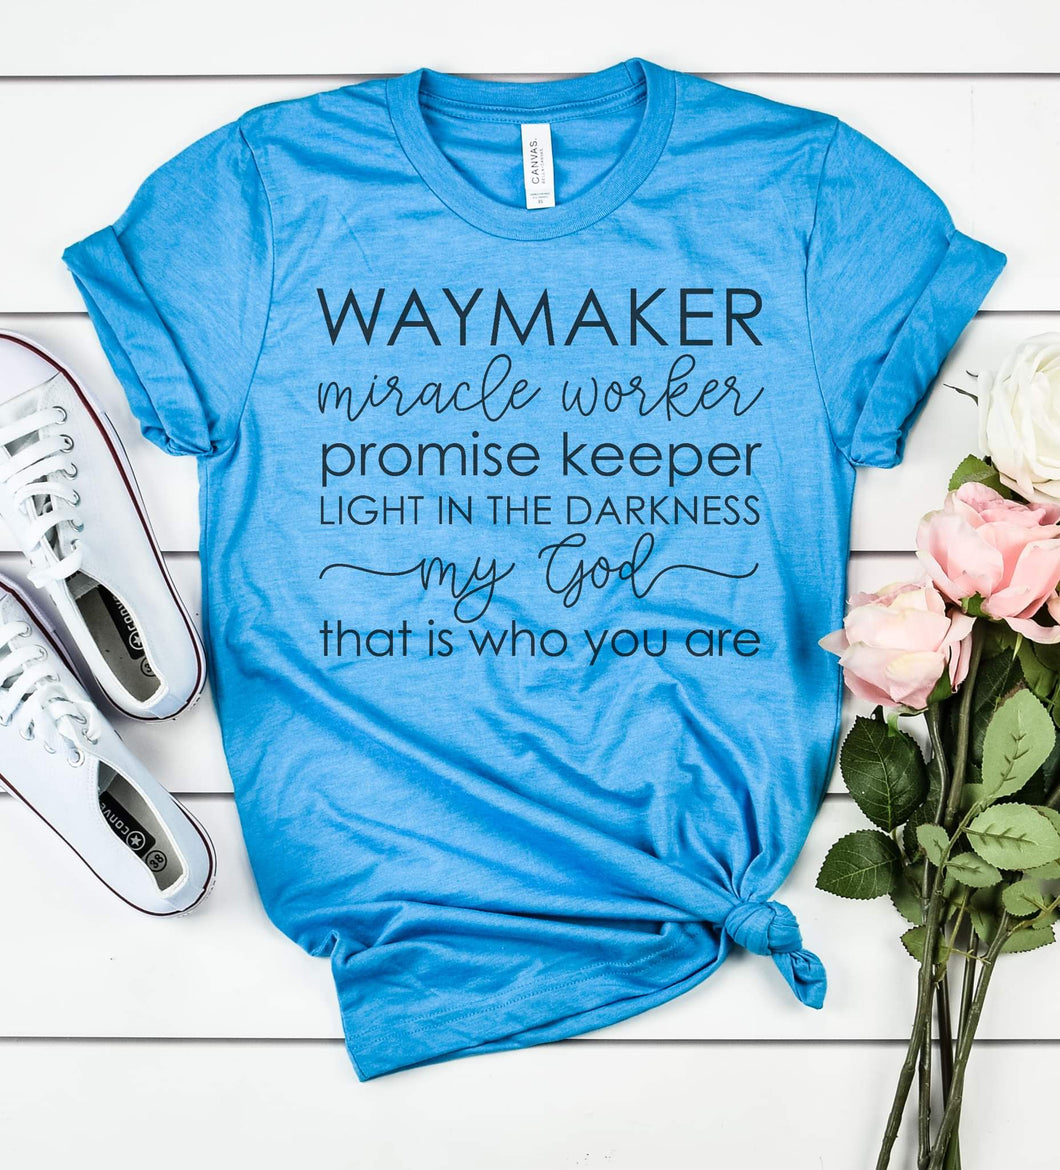 Waymaker Miracle Maker Graphic Tee